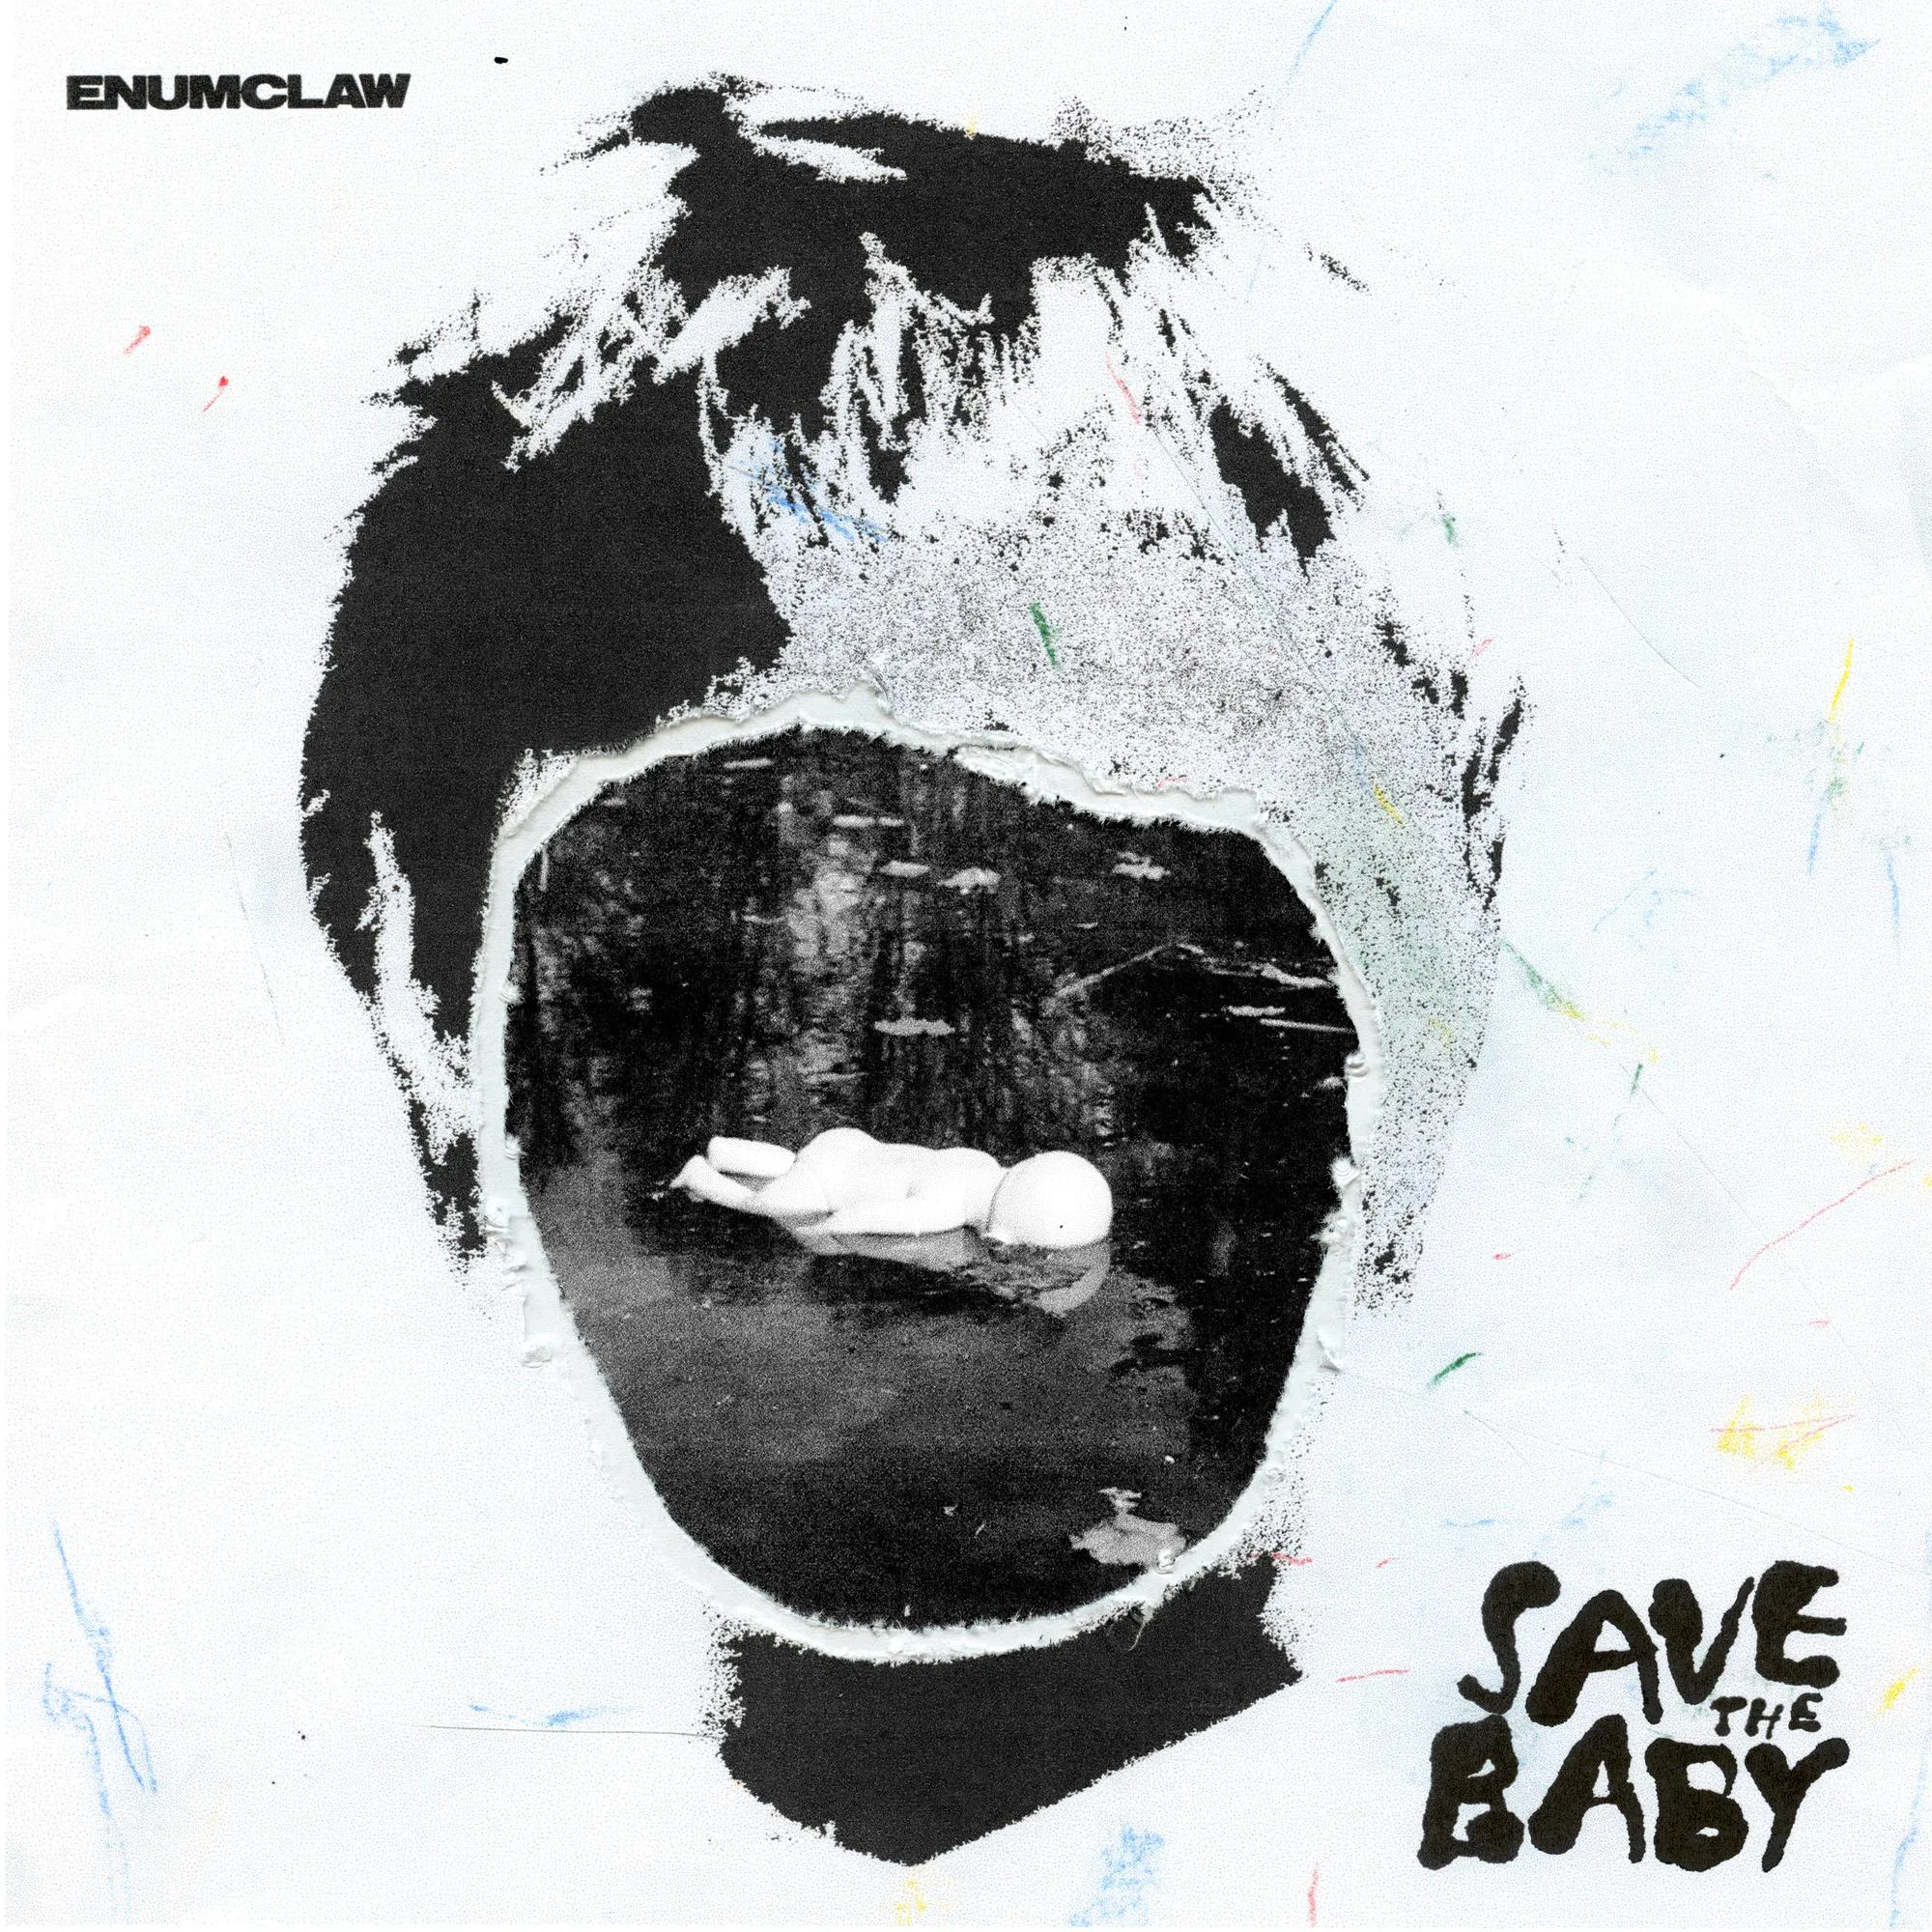 Enumclaw - Save the Baby artwork